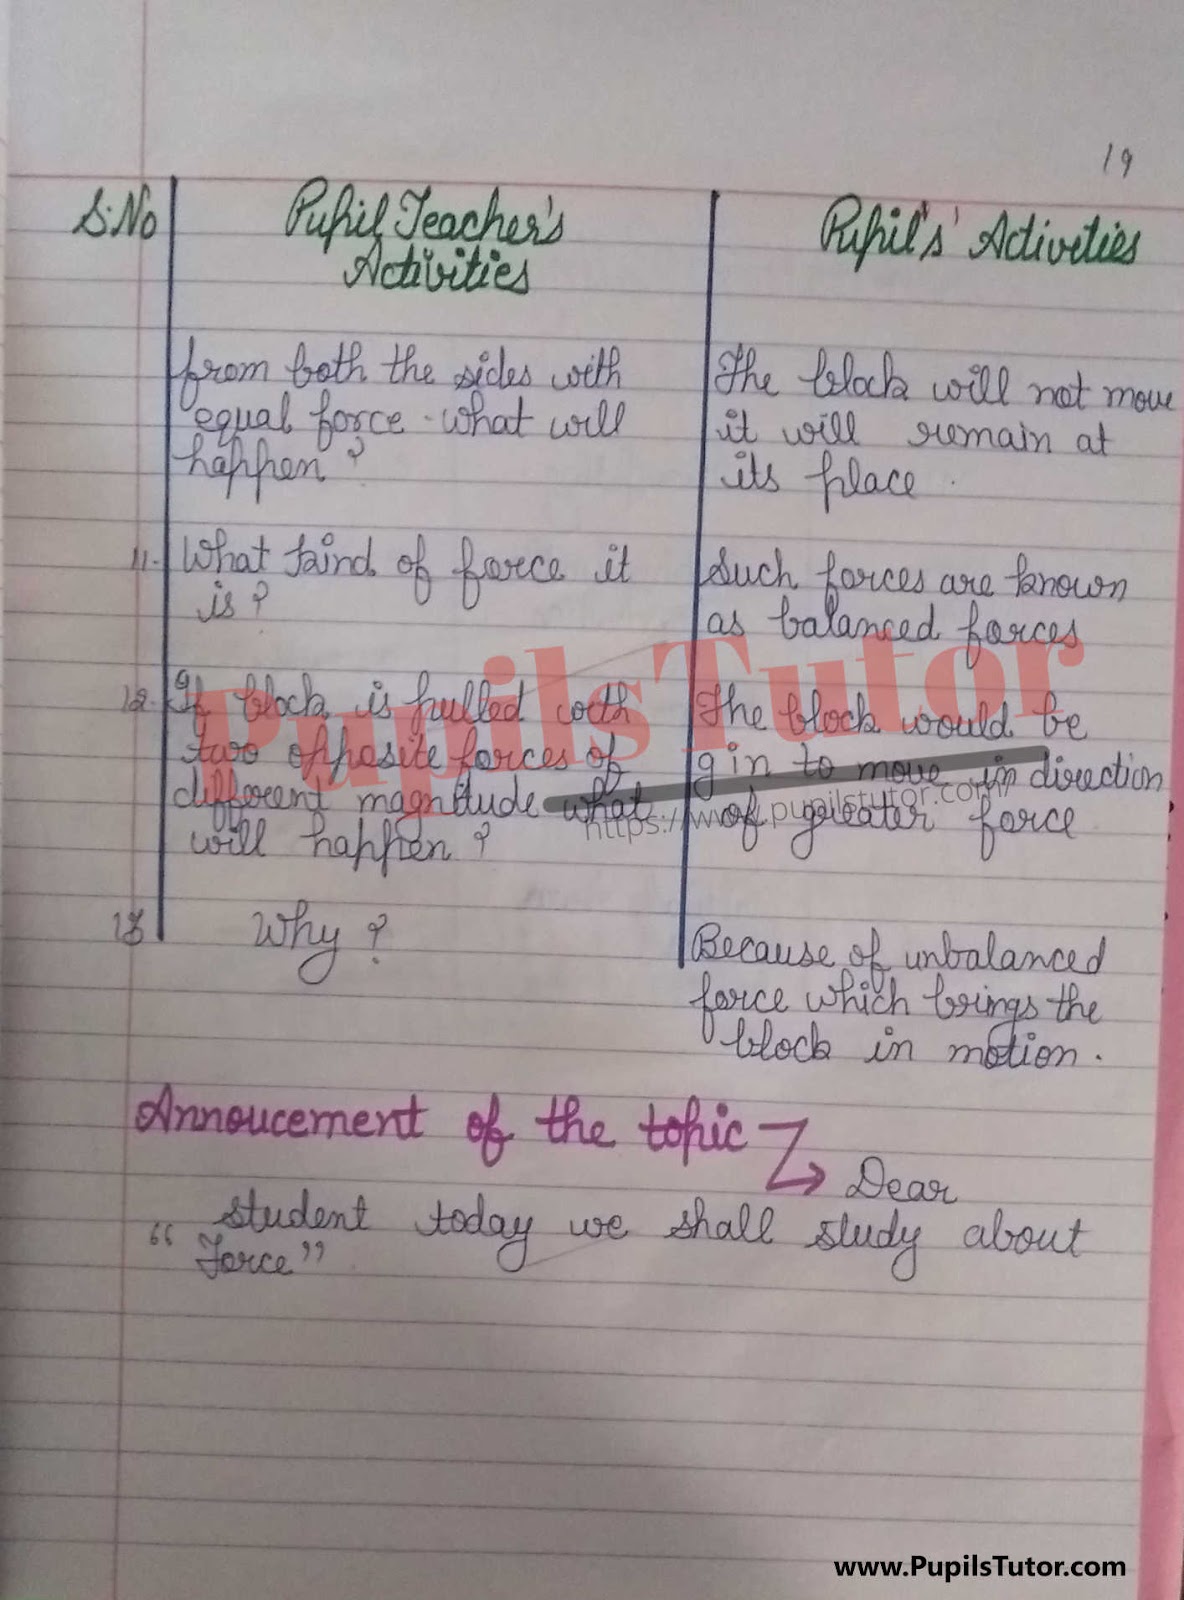 Class/Grade 8 To 10 Science Microteaching Skill Of Probing Questions Lesson Plan On What Is Force For CBSE NCERT KVS School And University College Teachers – (Page And Image Number 3) – www.pupilstutor.com